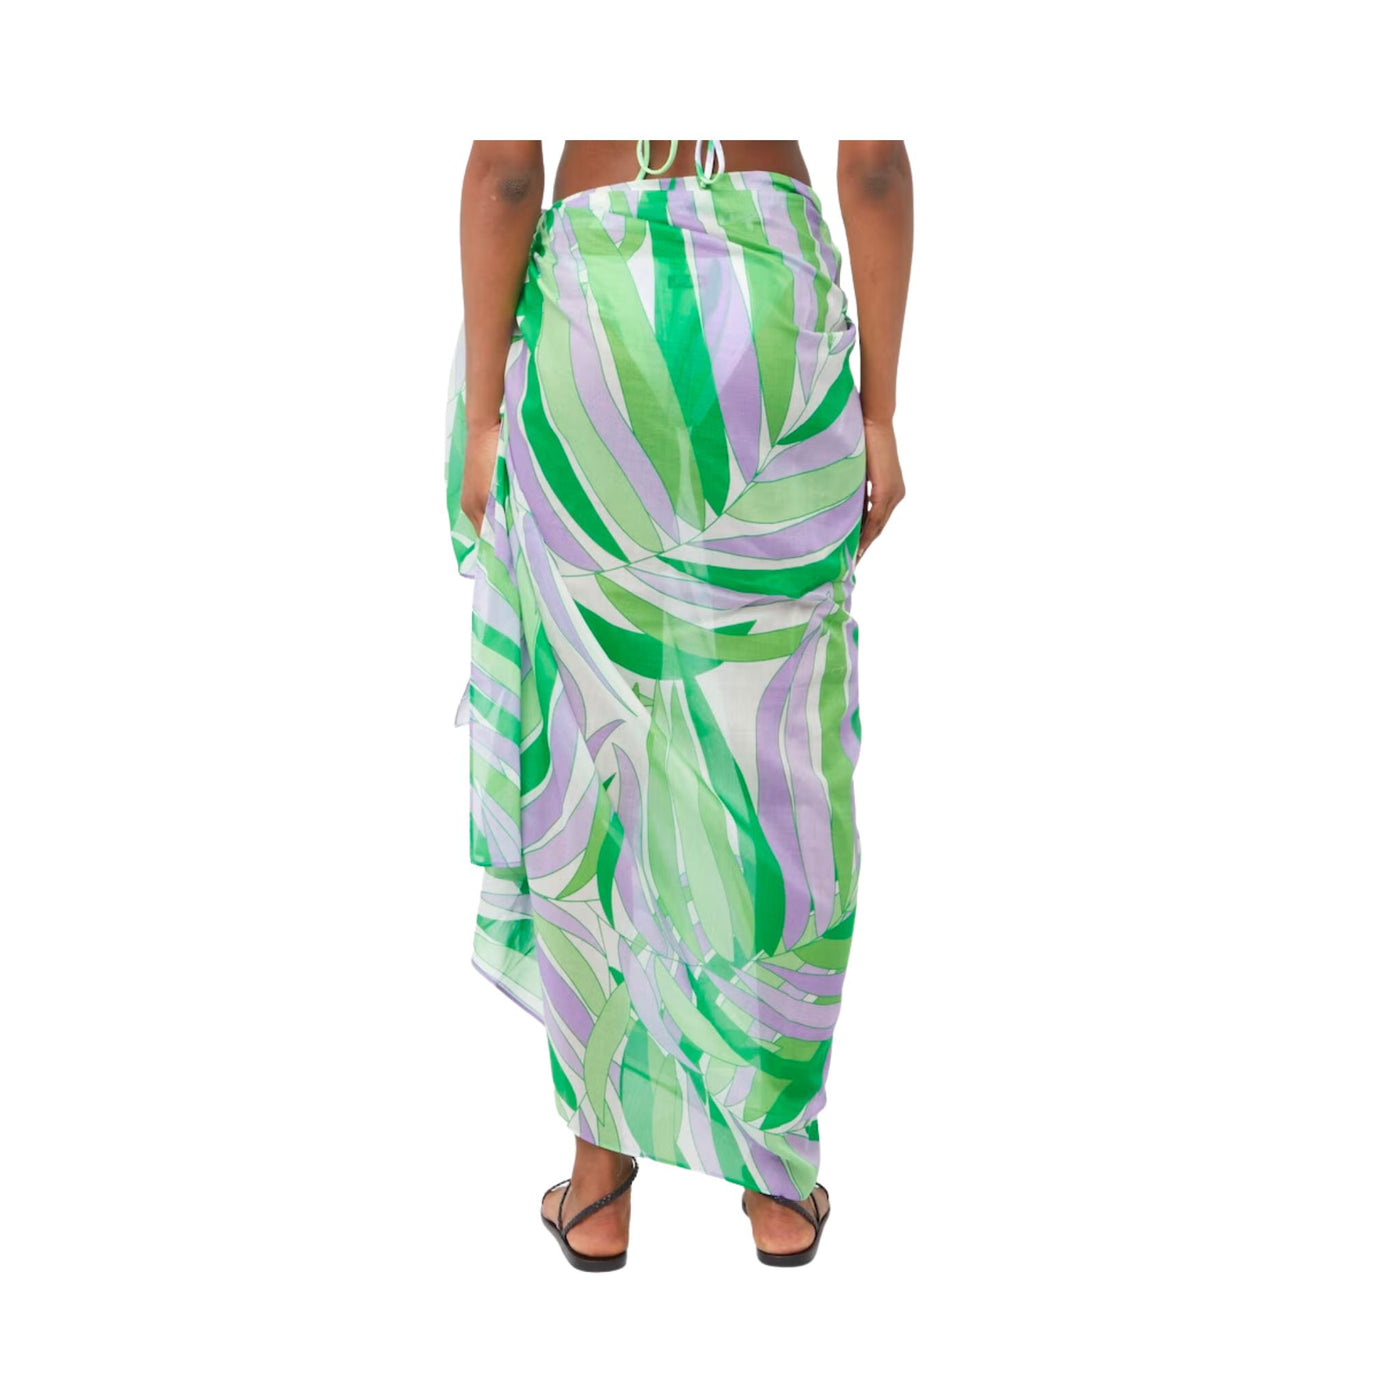 Women's pareo with wave pattern